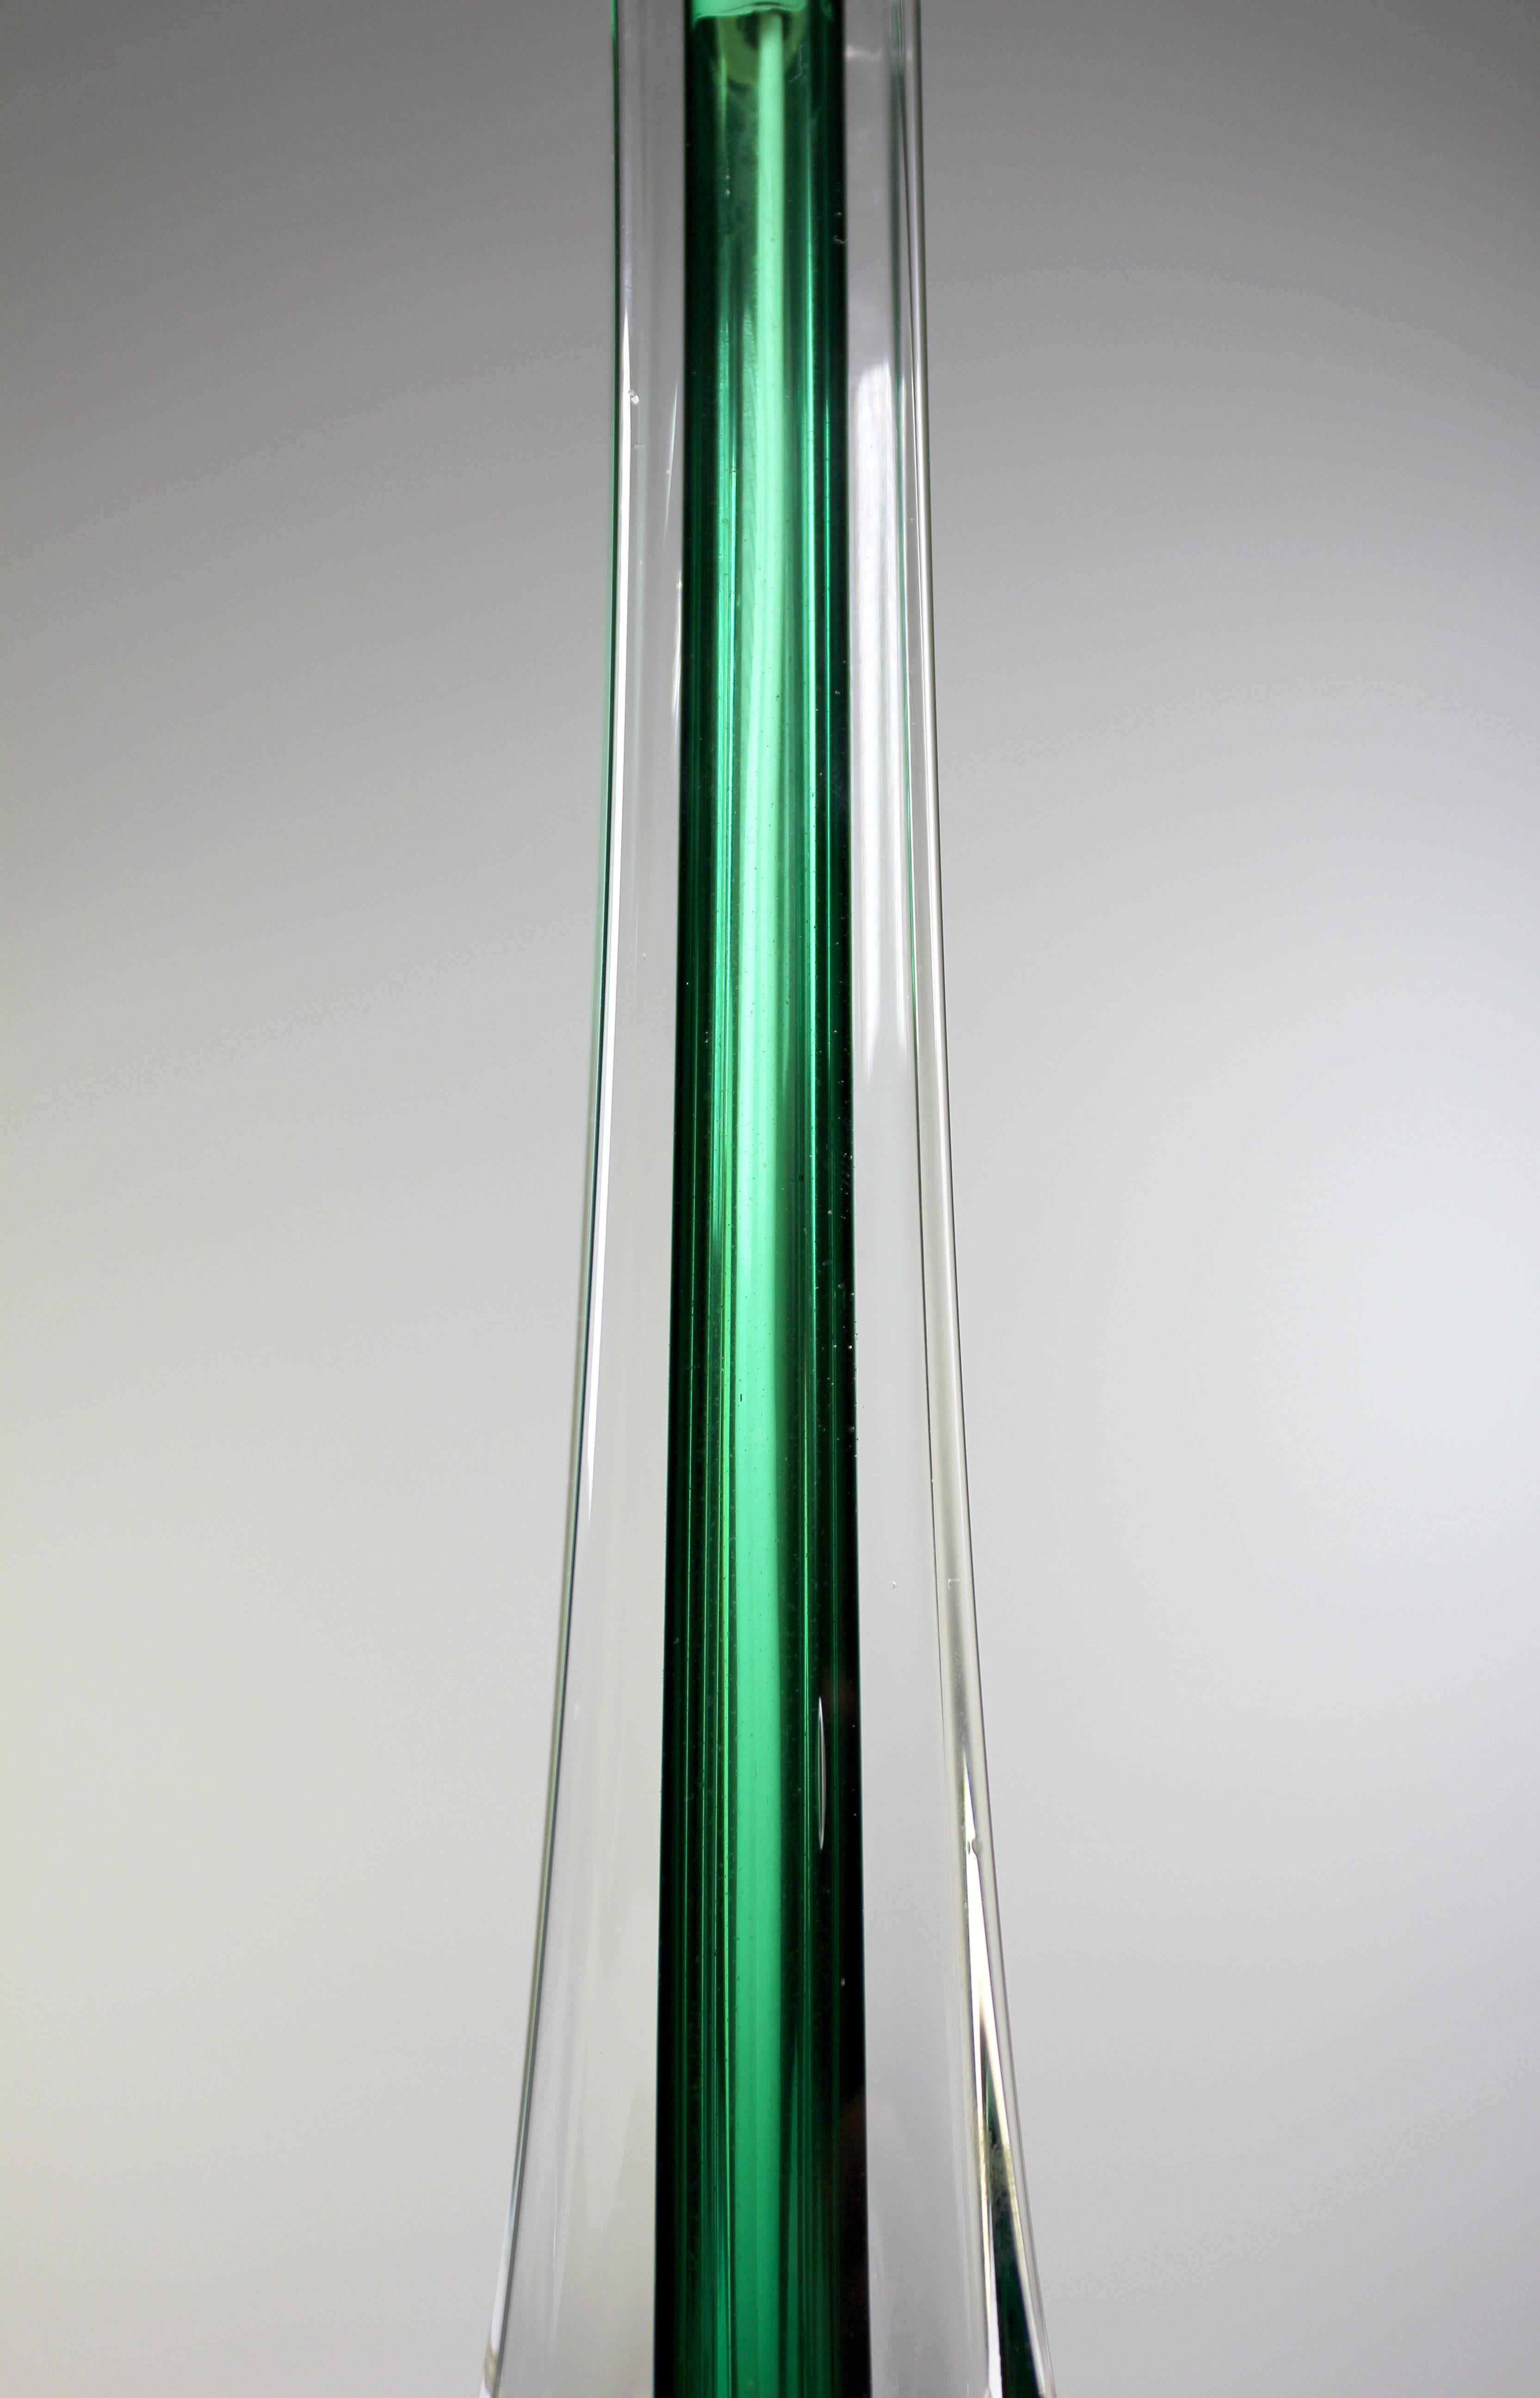 Slender and elegant Scandinavian Mid-Century Modern art glass table lamp. By Flygsfors' chief designer in the early 1950s, Paul Kedelv who is well known for his art glass designs and use of vivid colors. Manufactured by Flygsfors Glasbruk in